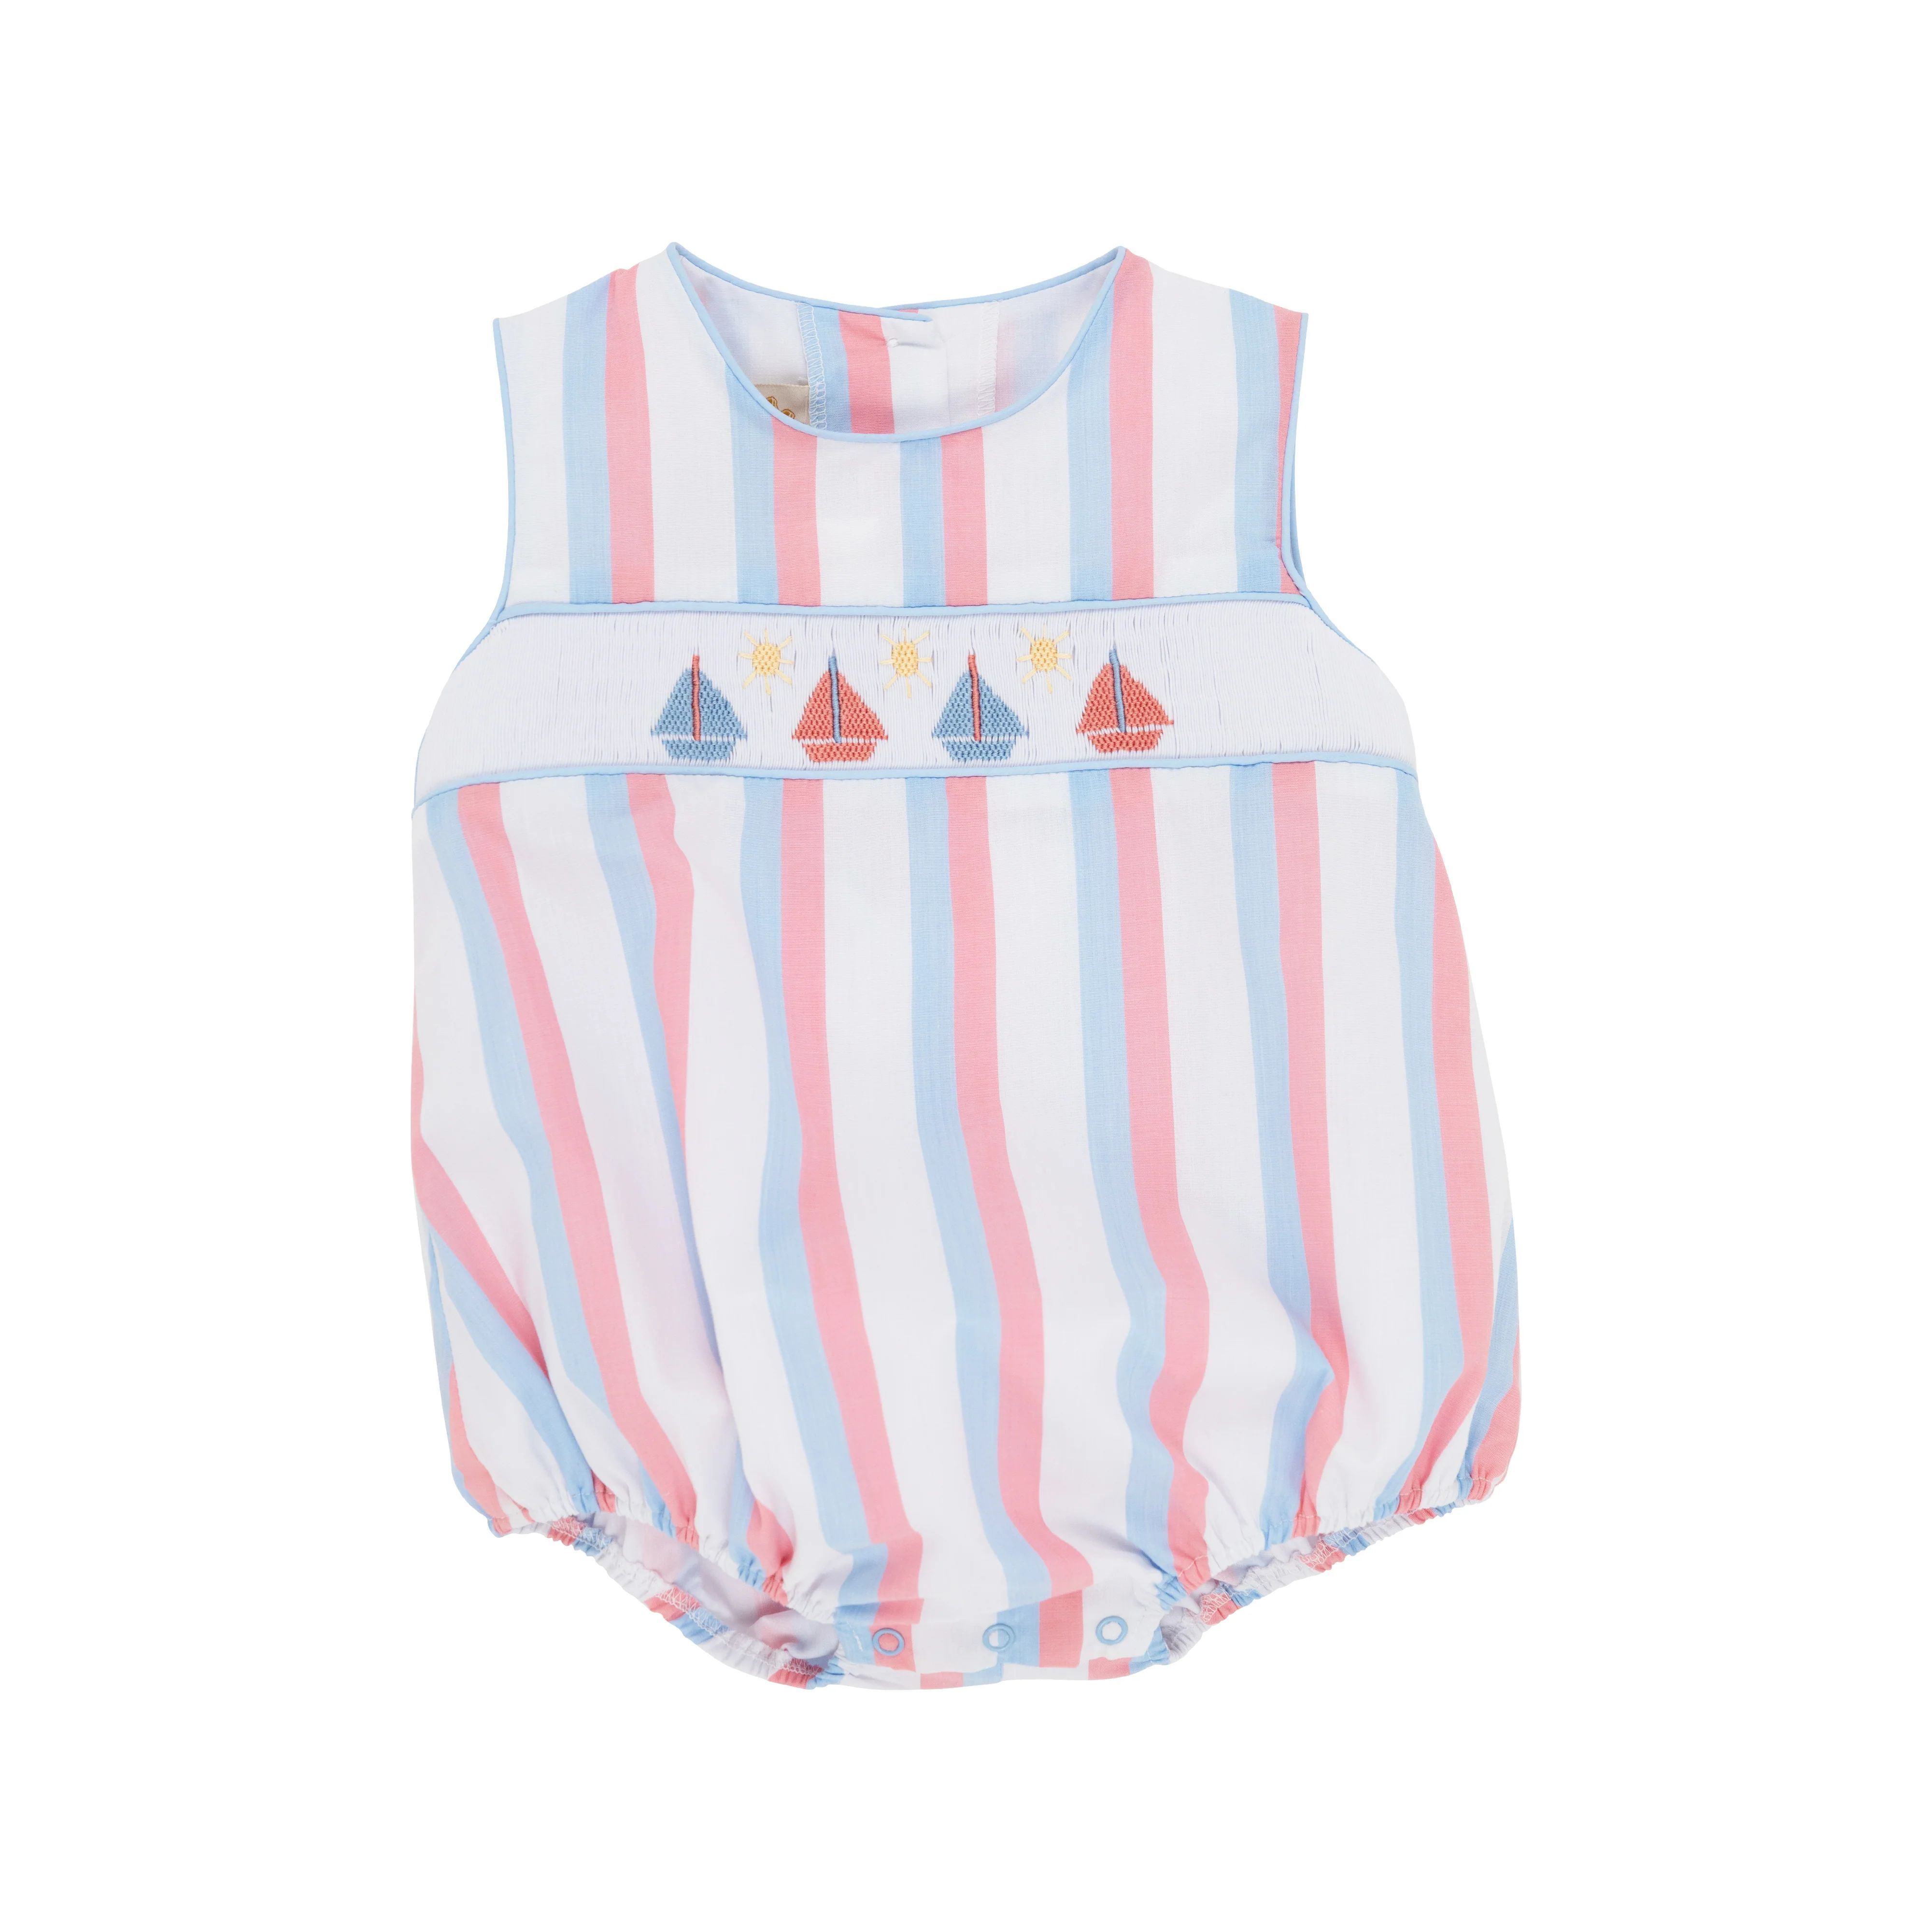 Smocked Brooke Bubble - New River Nautical Stripe with Beale Street Blue & Sailboat Smocking | The Beaufort Bonnet Company